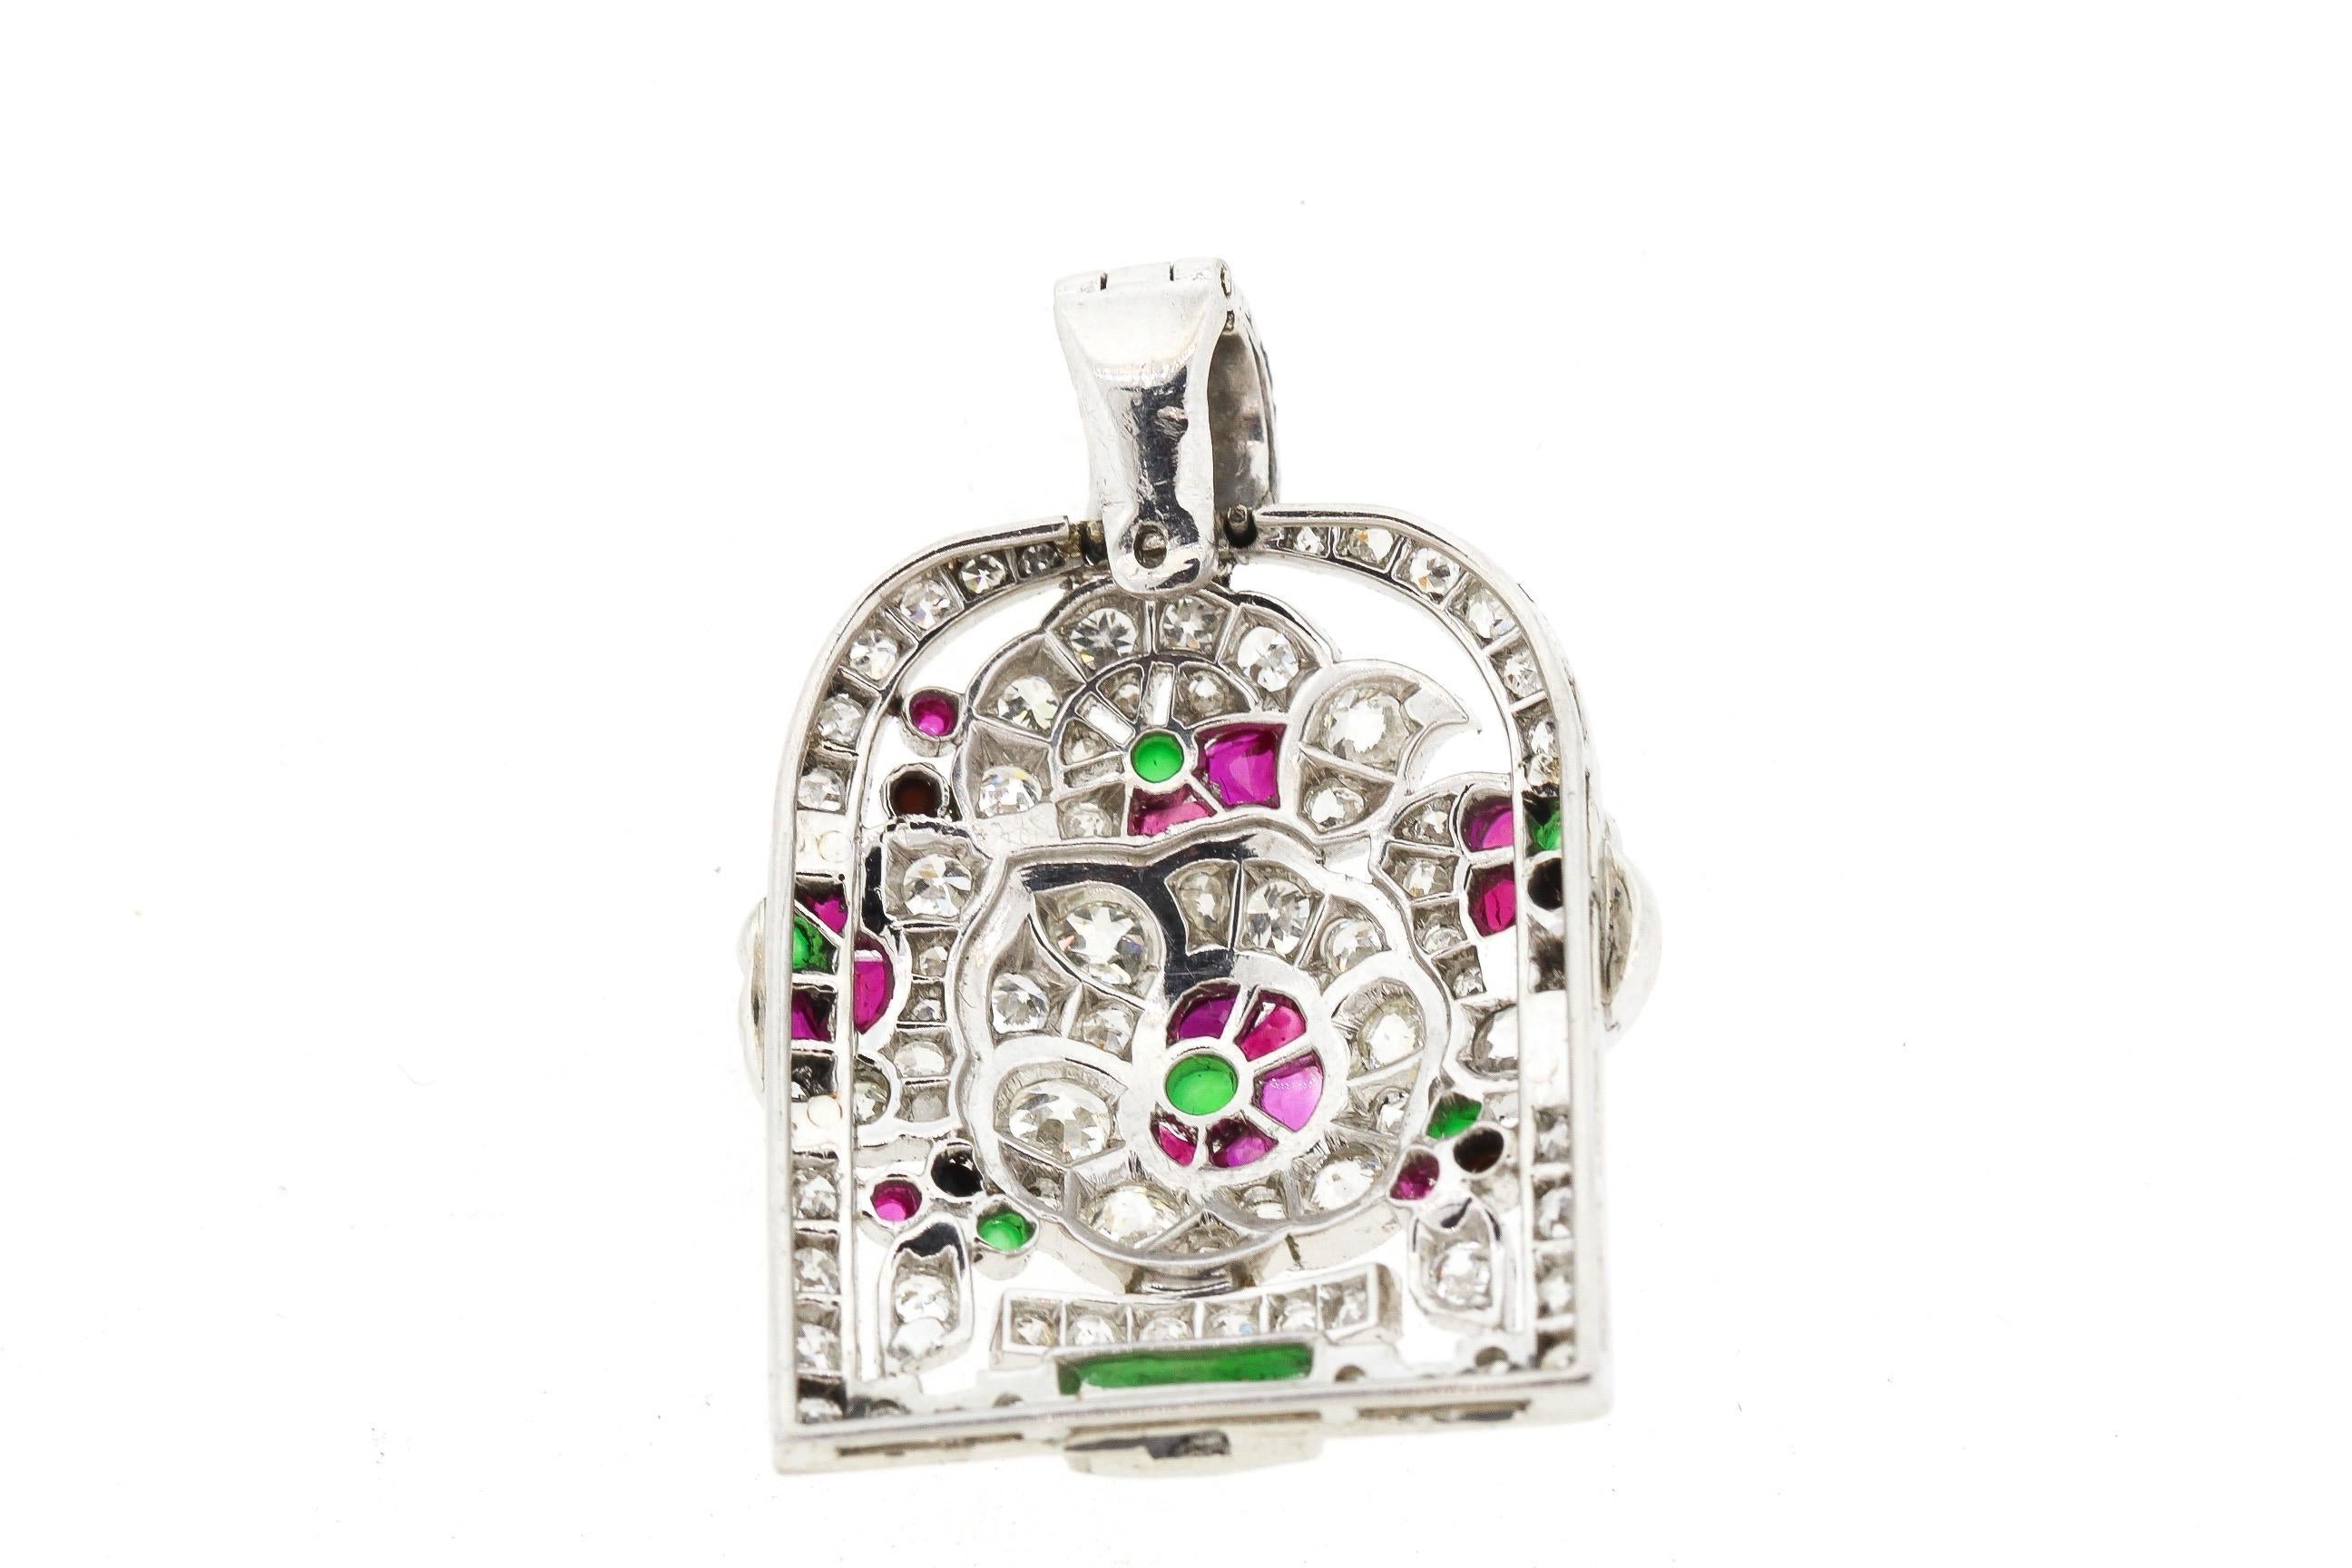 An antique Art Deco diamond and gem set jardiniere pendant made in platinum circa 1920. This pendant is a colorful rendering of a potted flower set with buff top rubies, chrysoprase and onyx. The pendant is dimensional and bright. The bail opens up